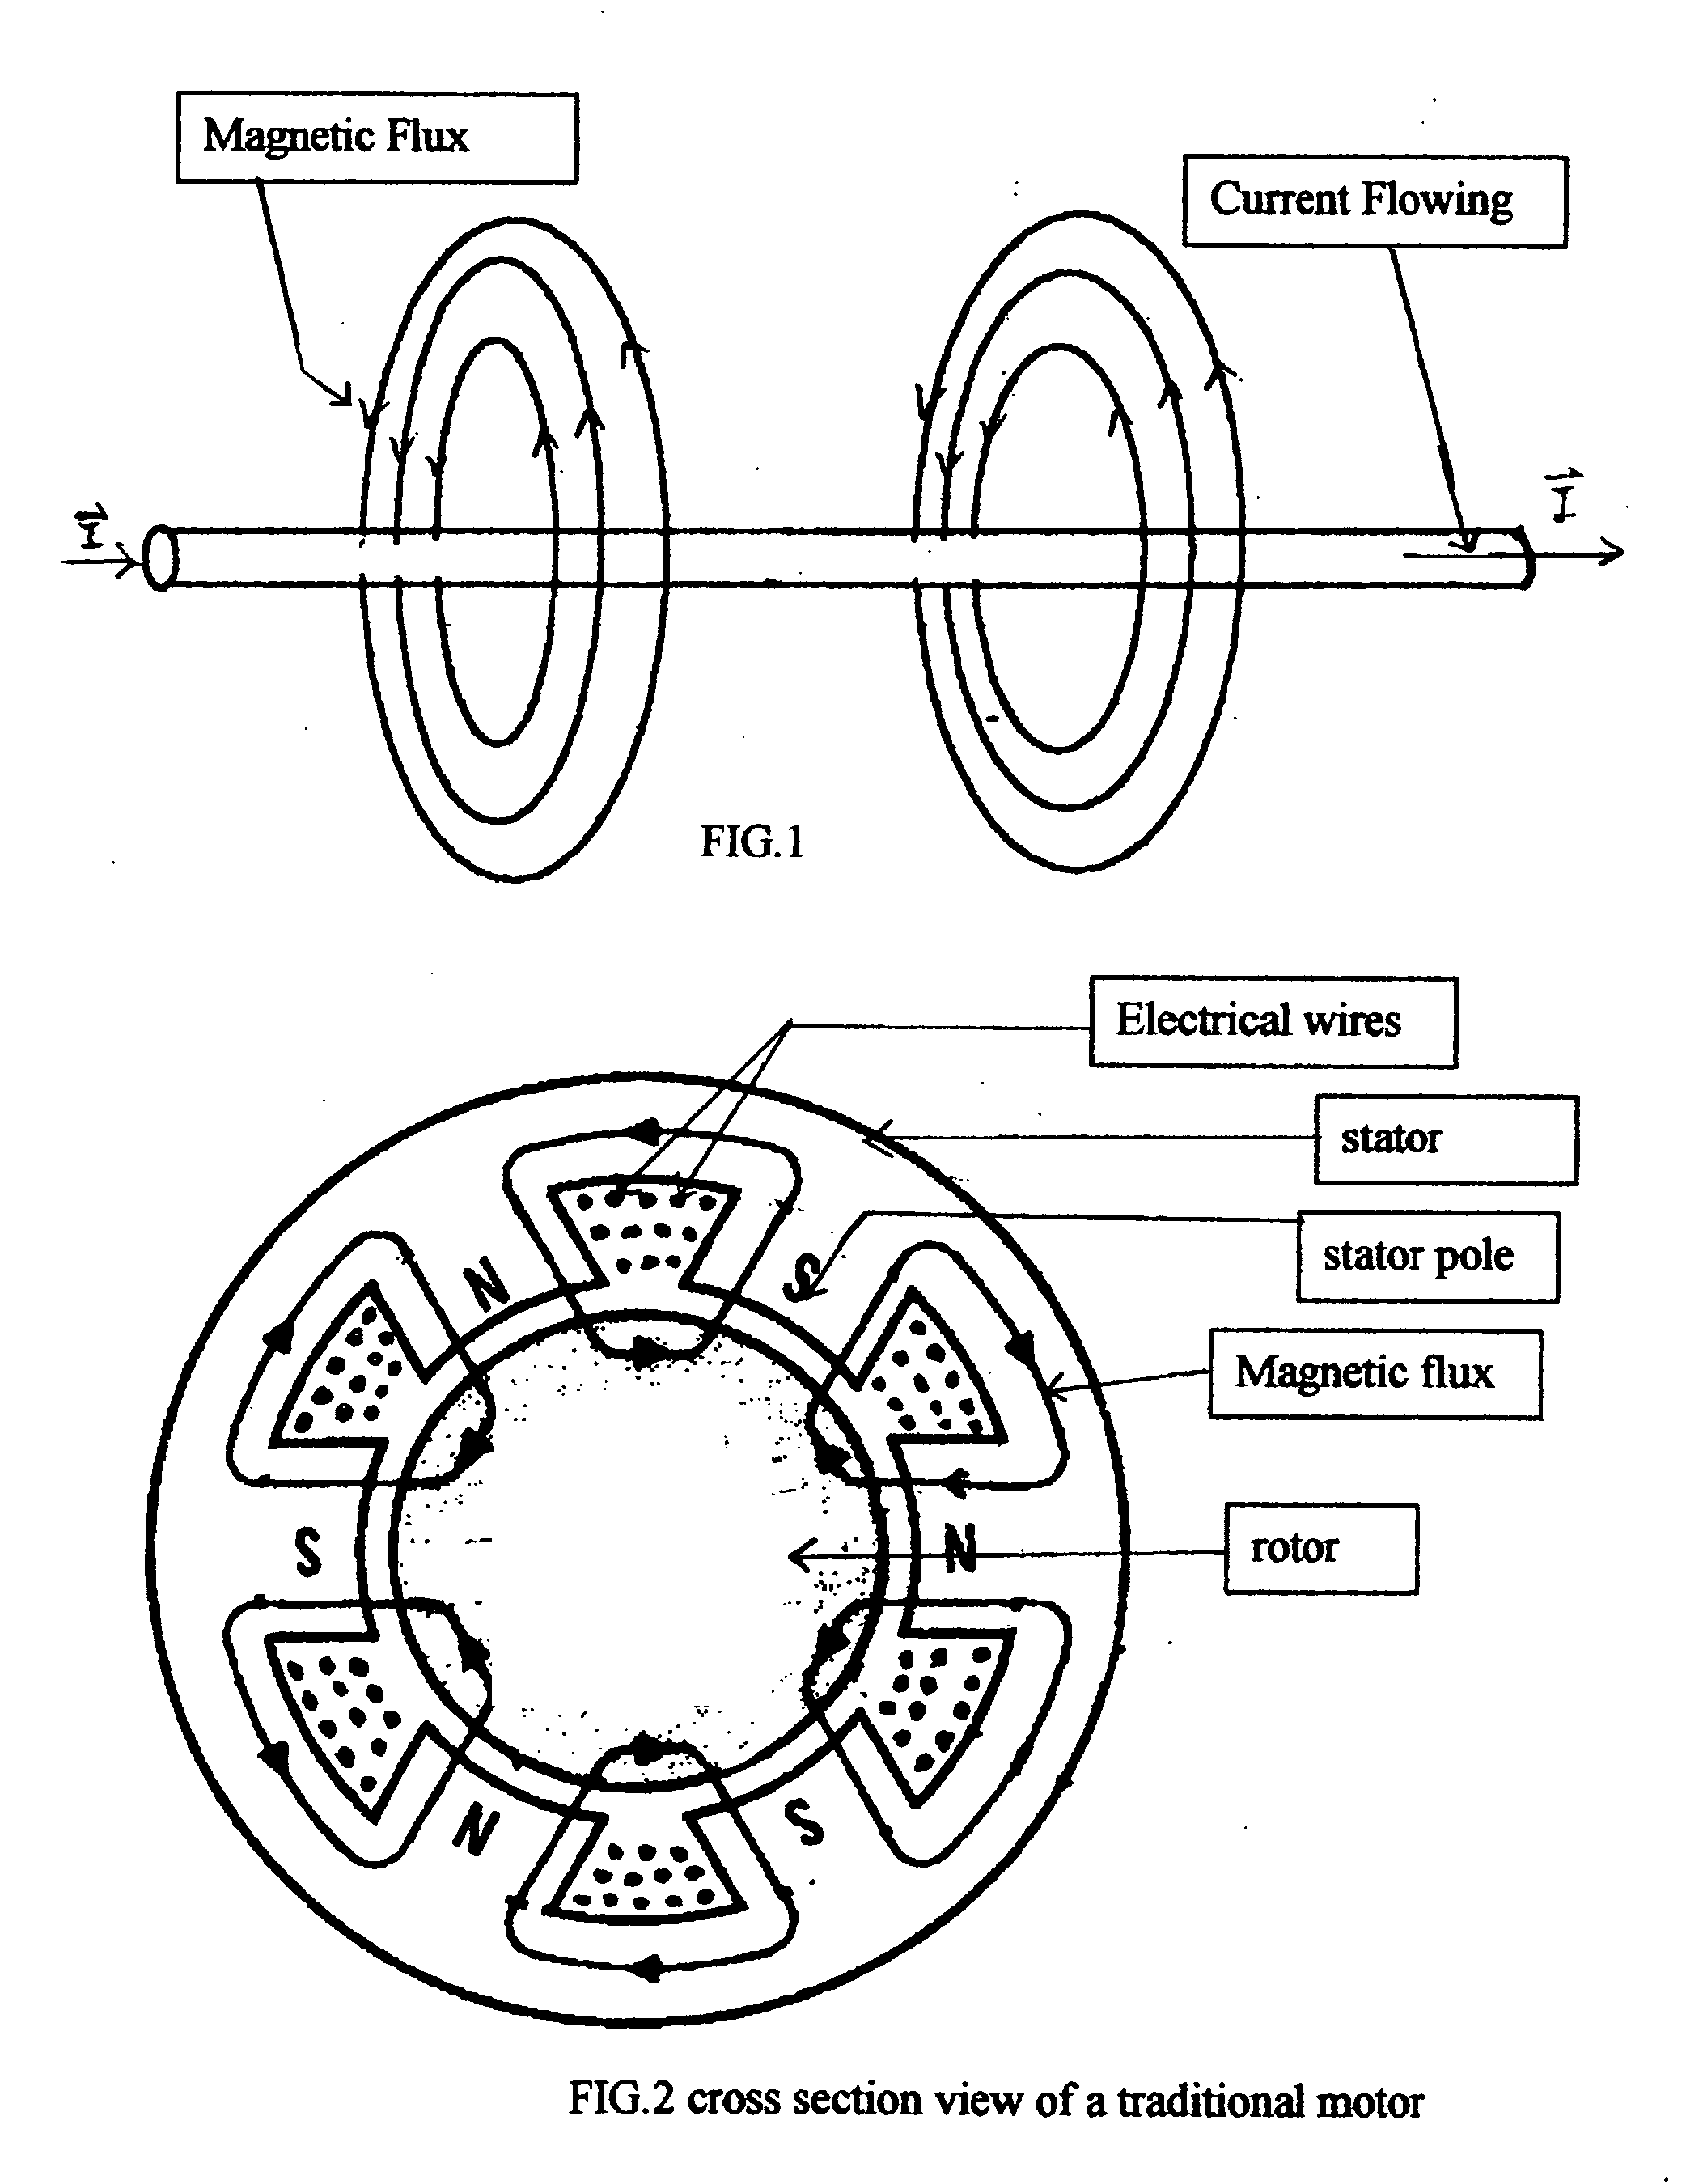 Mike 4001 design of the stator of electrical motor & generator